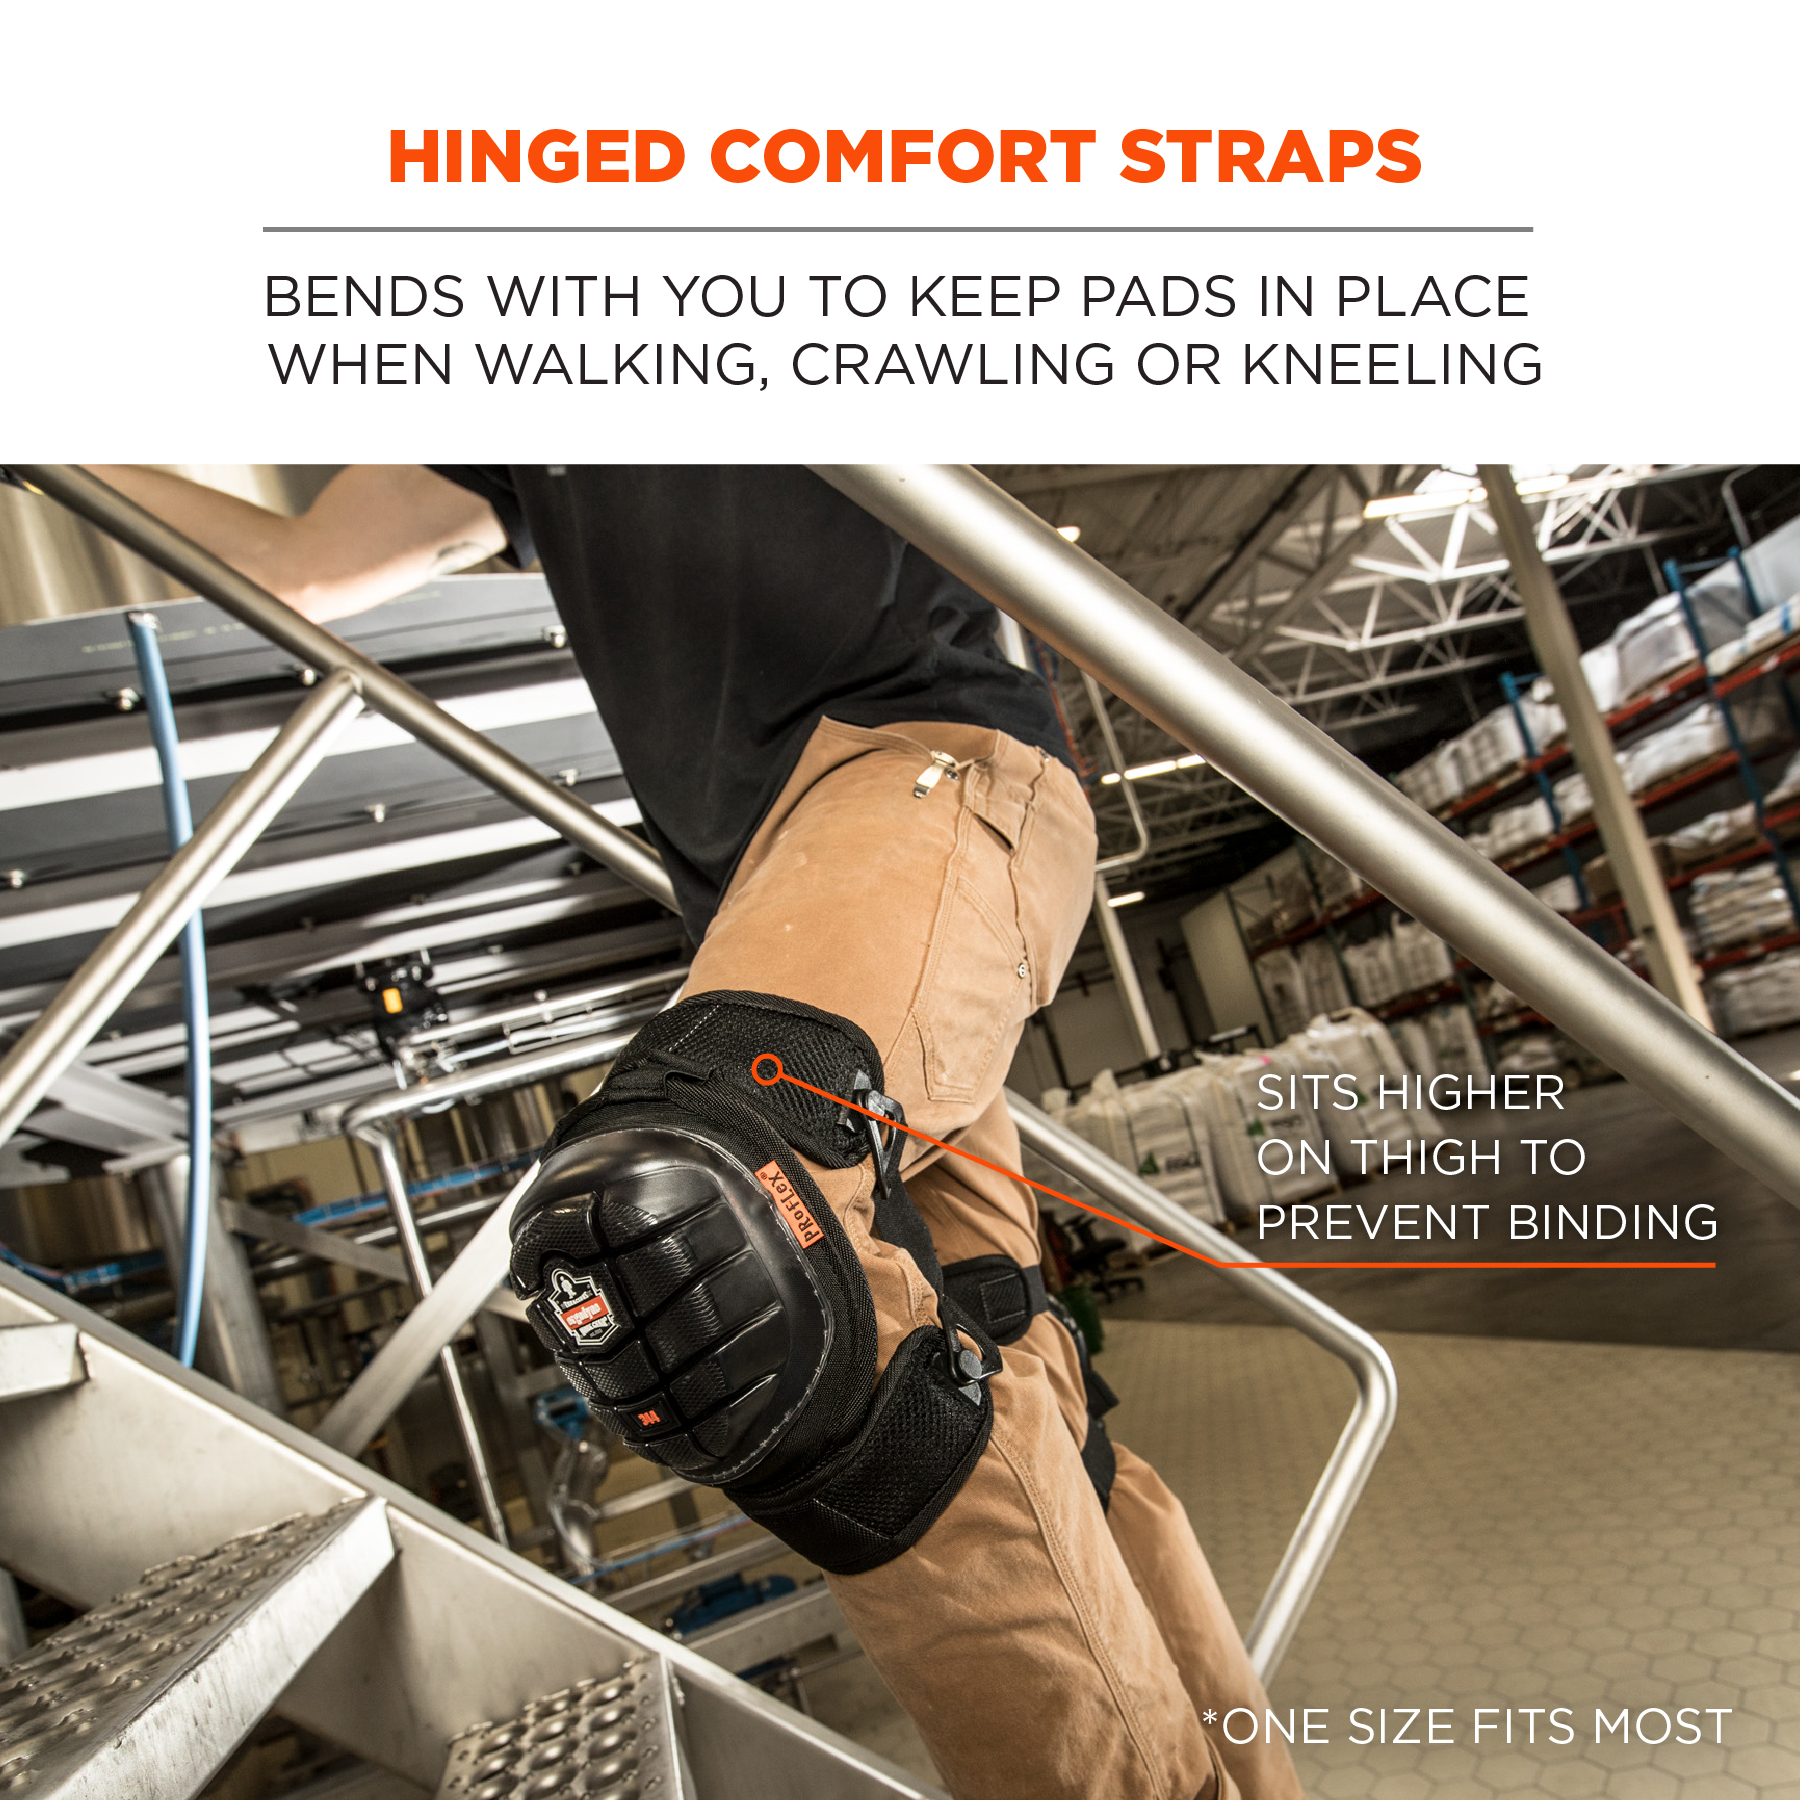 Injected Gel Knee Pads with Comfort Straps - Short Hard Cap